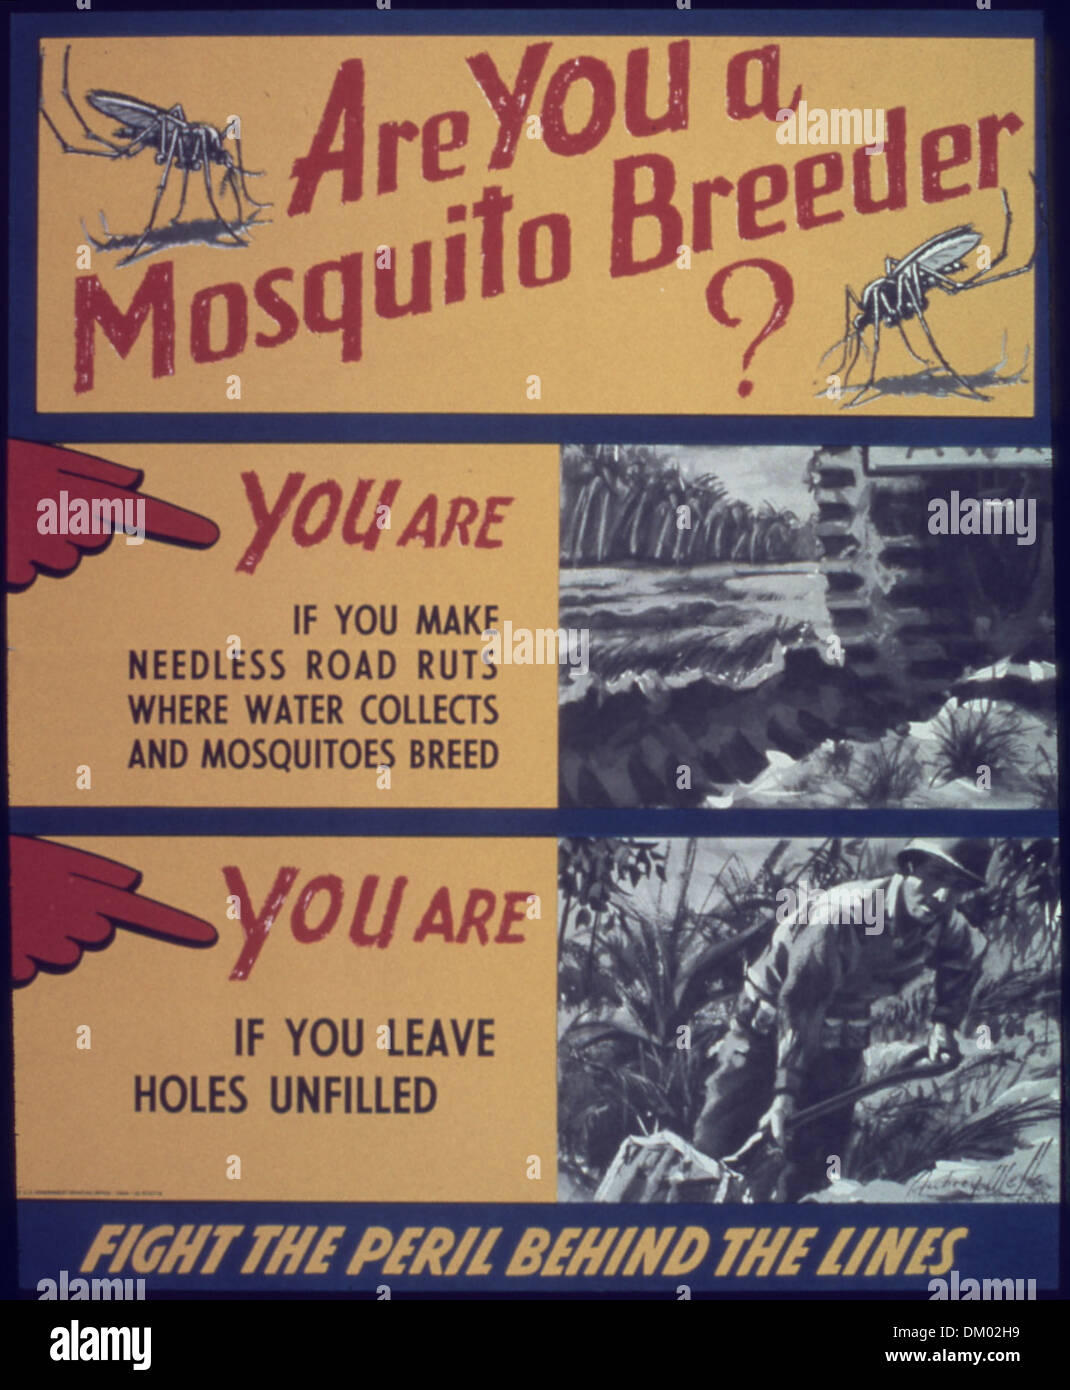 'Are you a mosquito breeder' 513877 Stock Photo